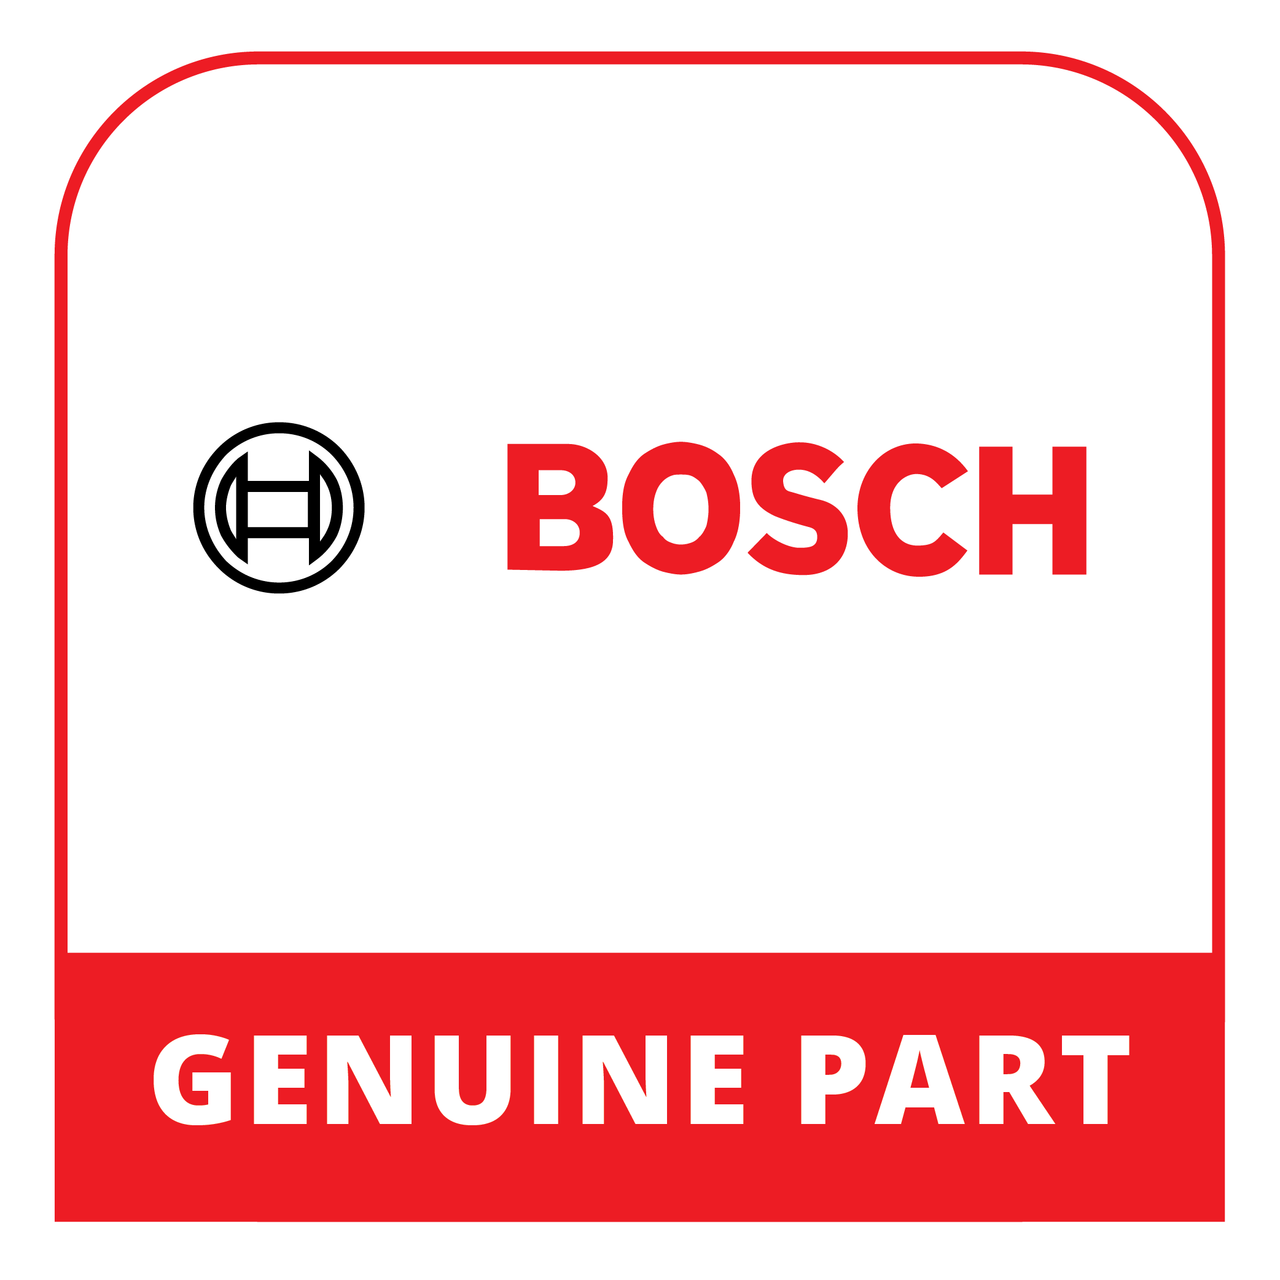 Bosch (Thermador) 20003011 - Cover Sheet - Genuine Bosch (Thermador) Part